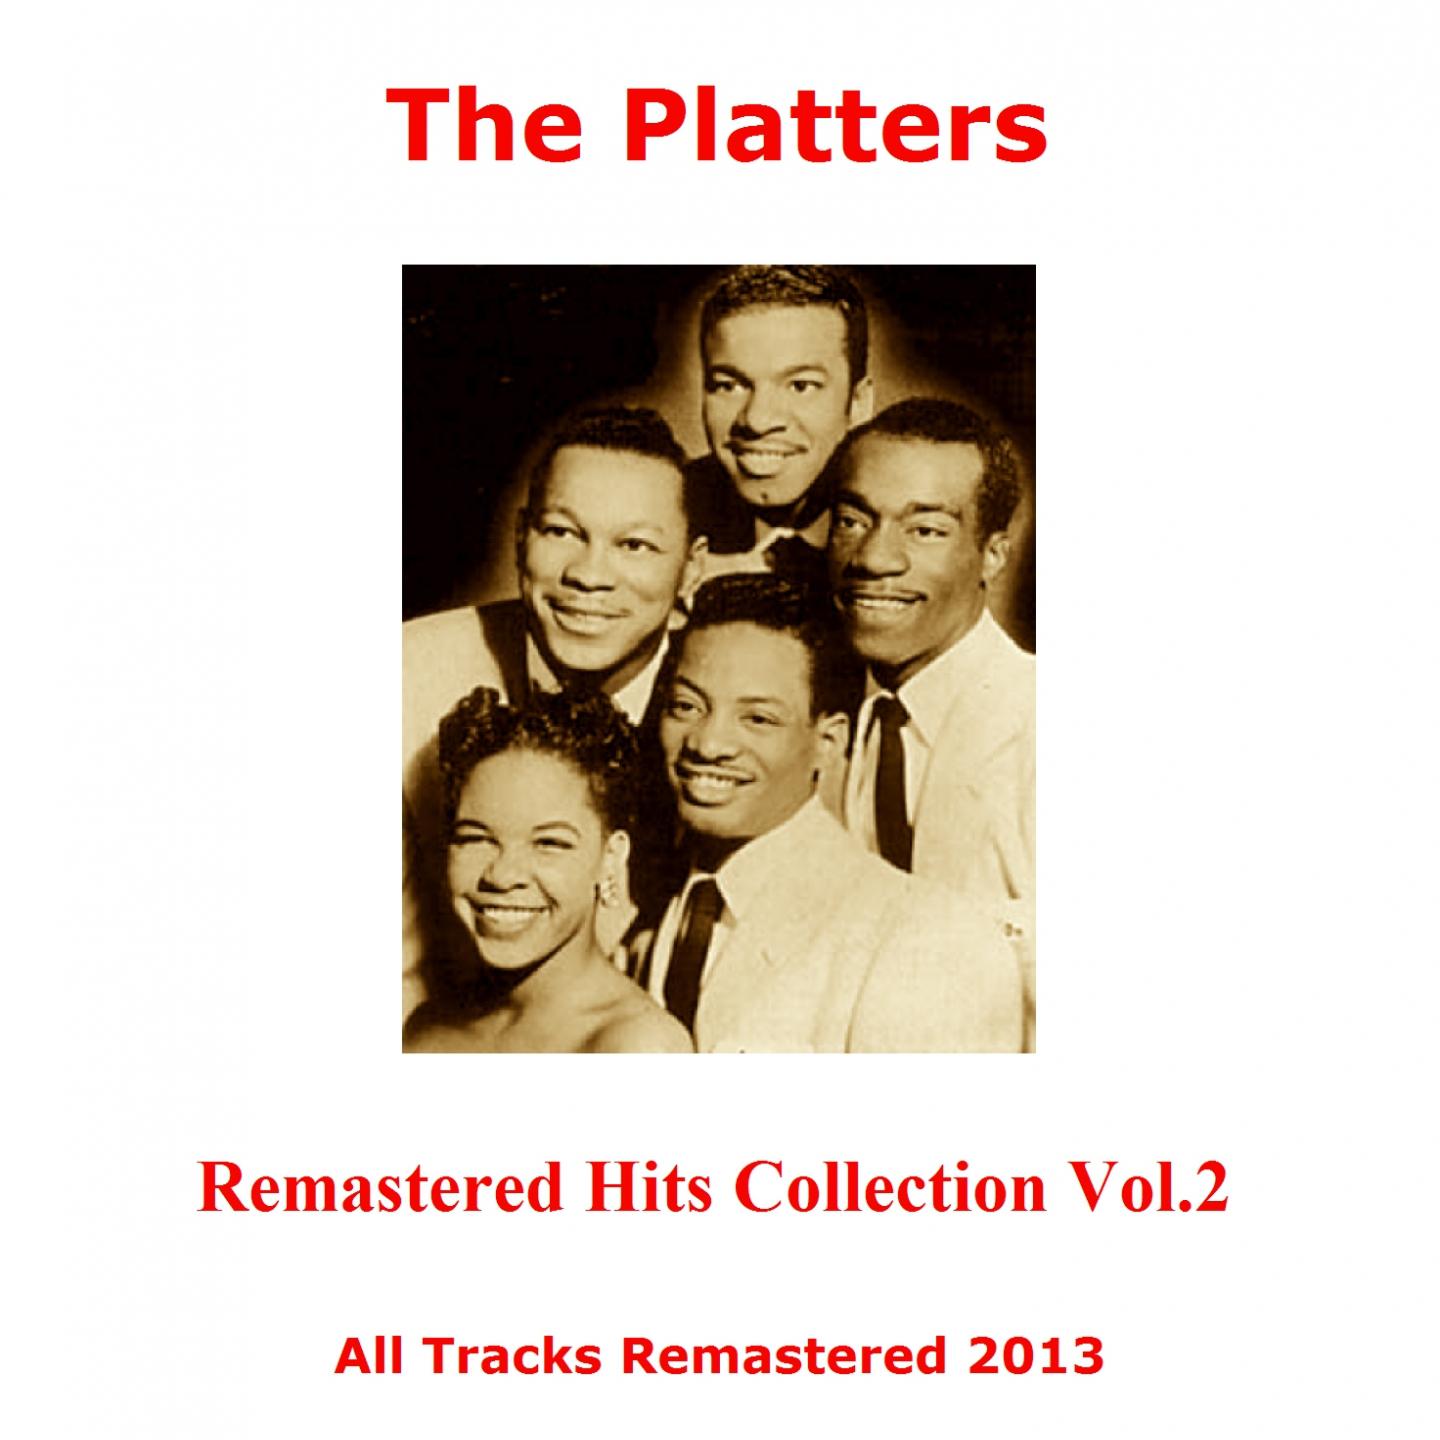 Remastered Hits Collection, Vol. 2 (All Tracks Remastered 2013)